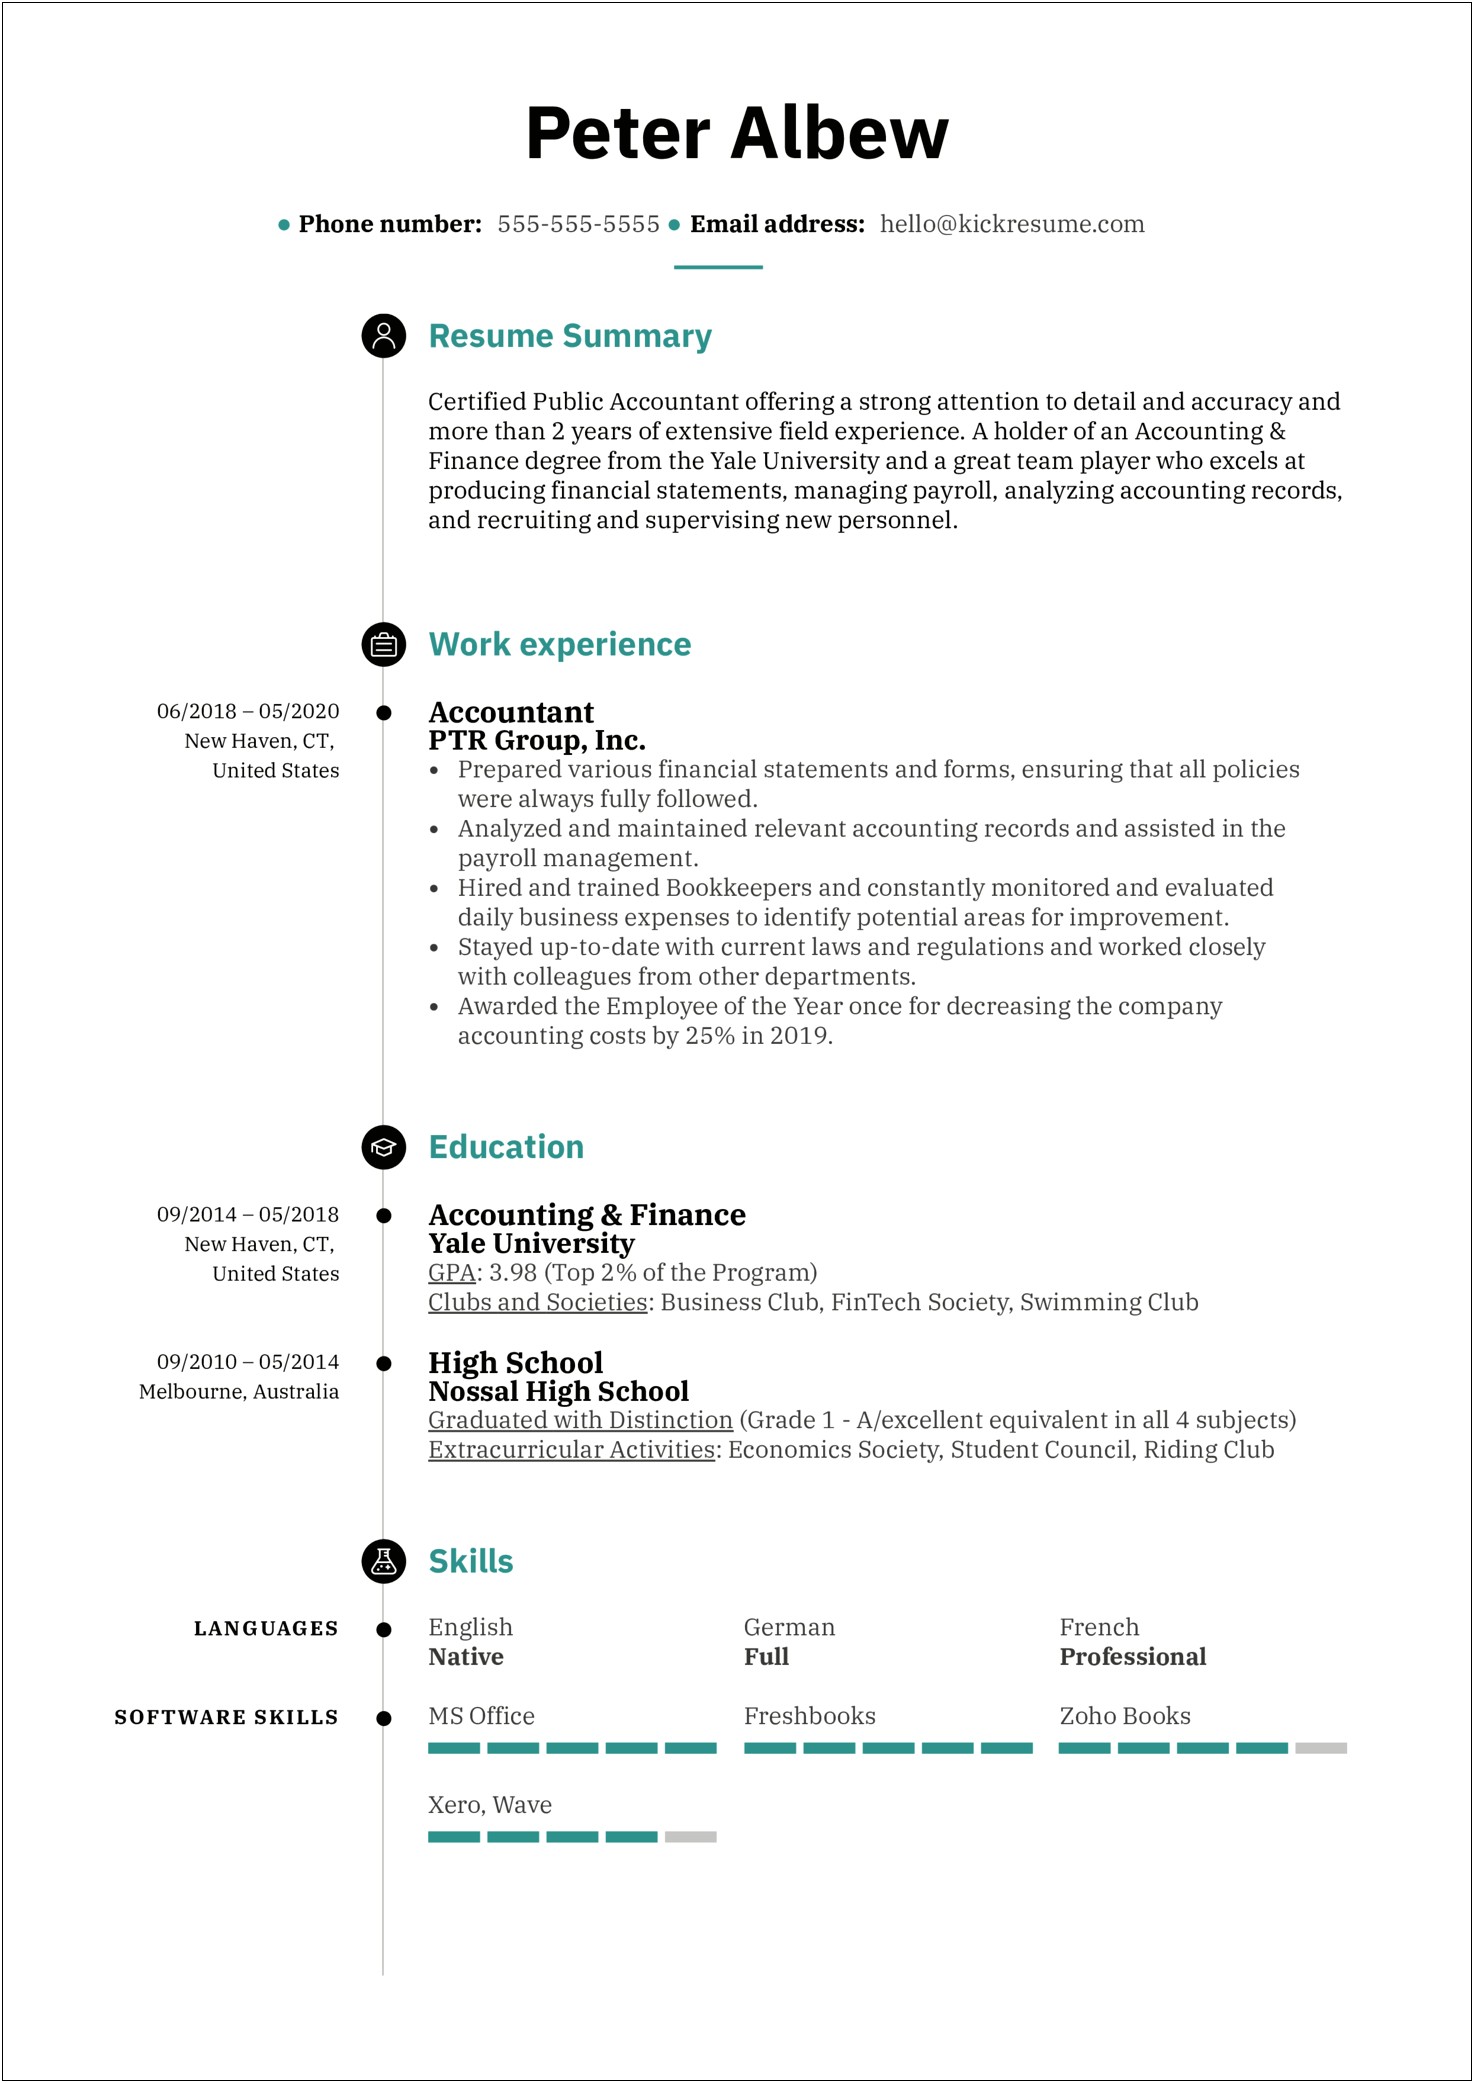 Samples Of Resumes With Summarys